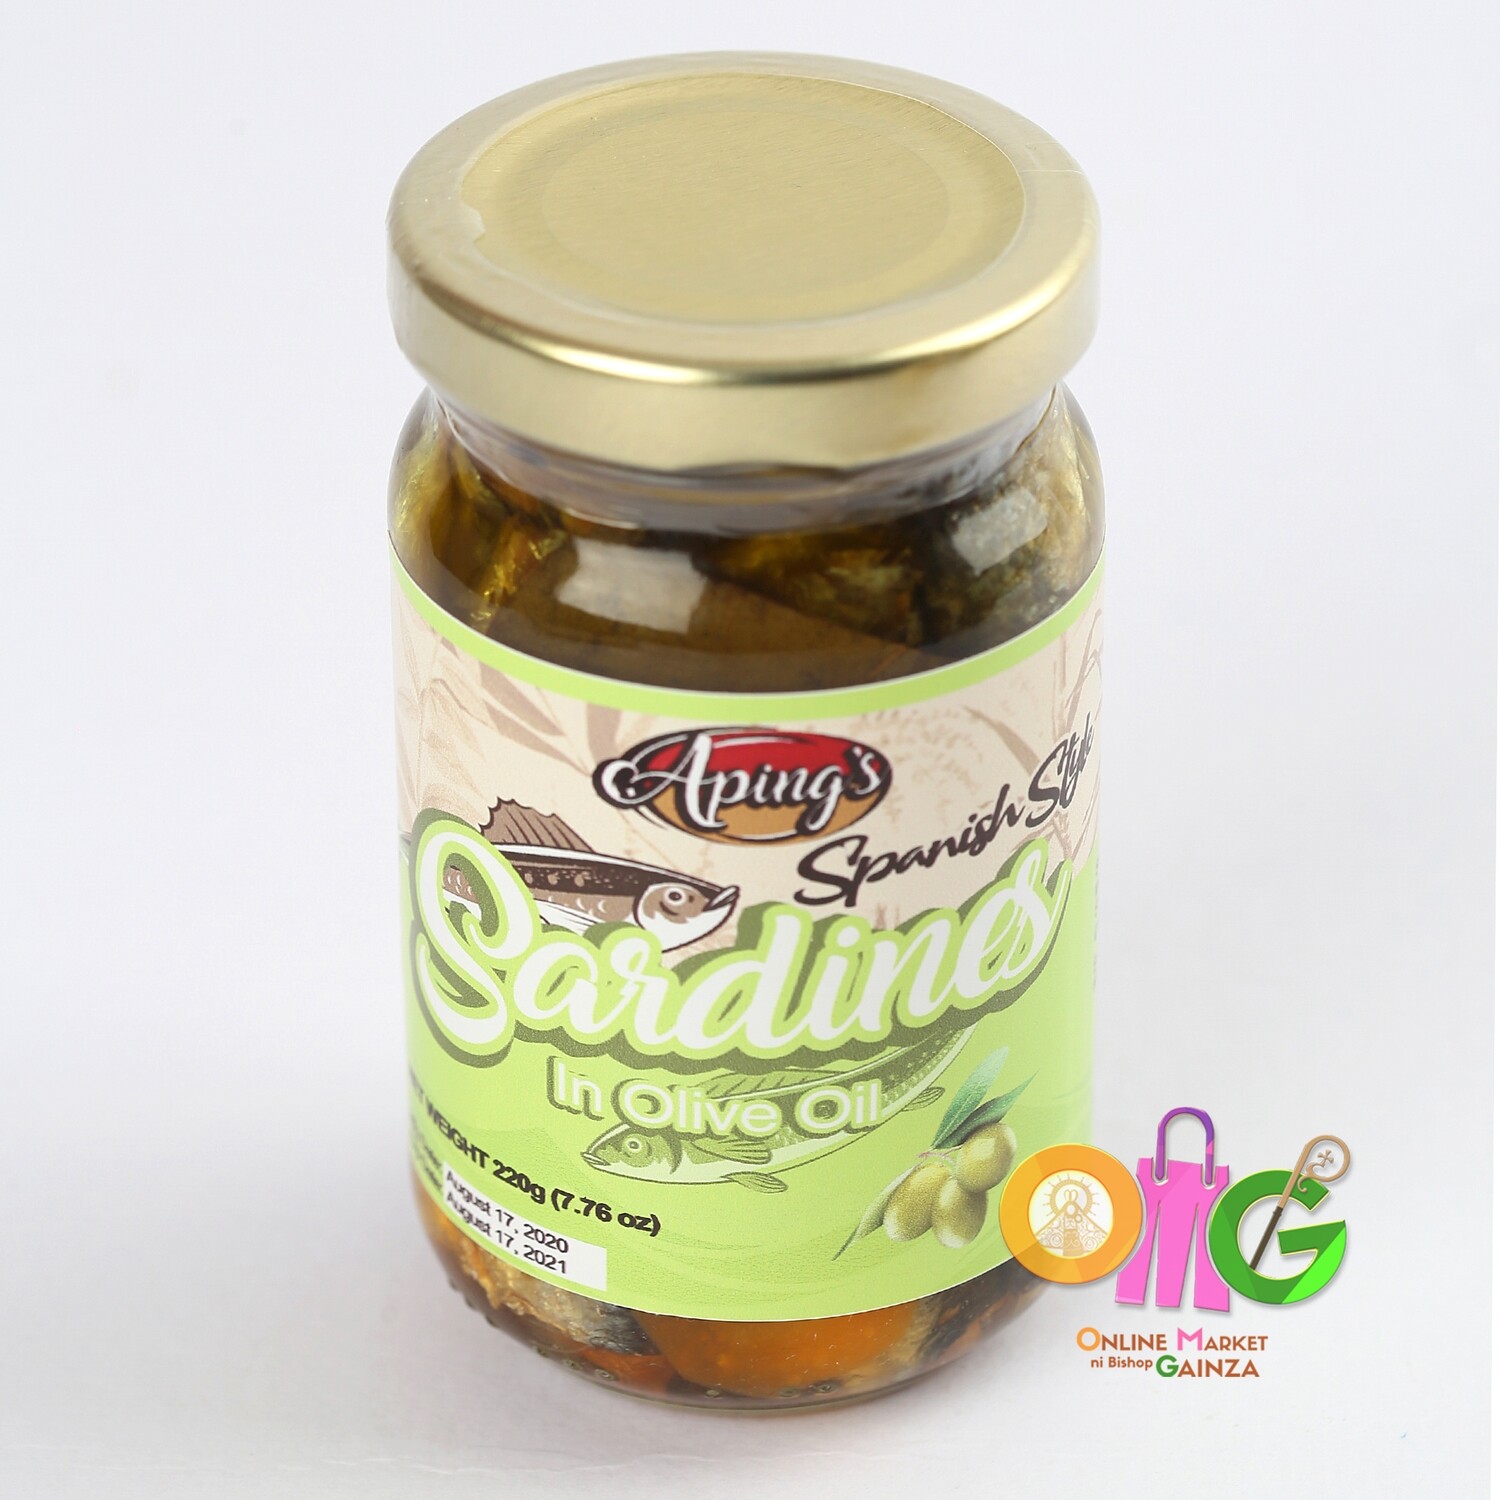 Aping's - Spanish Style Sardines in Olive Oil